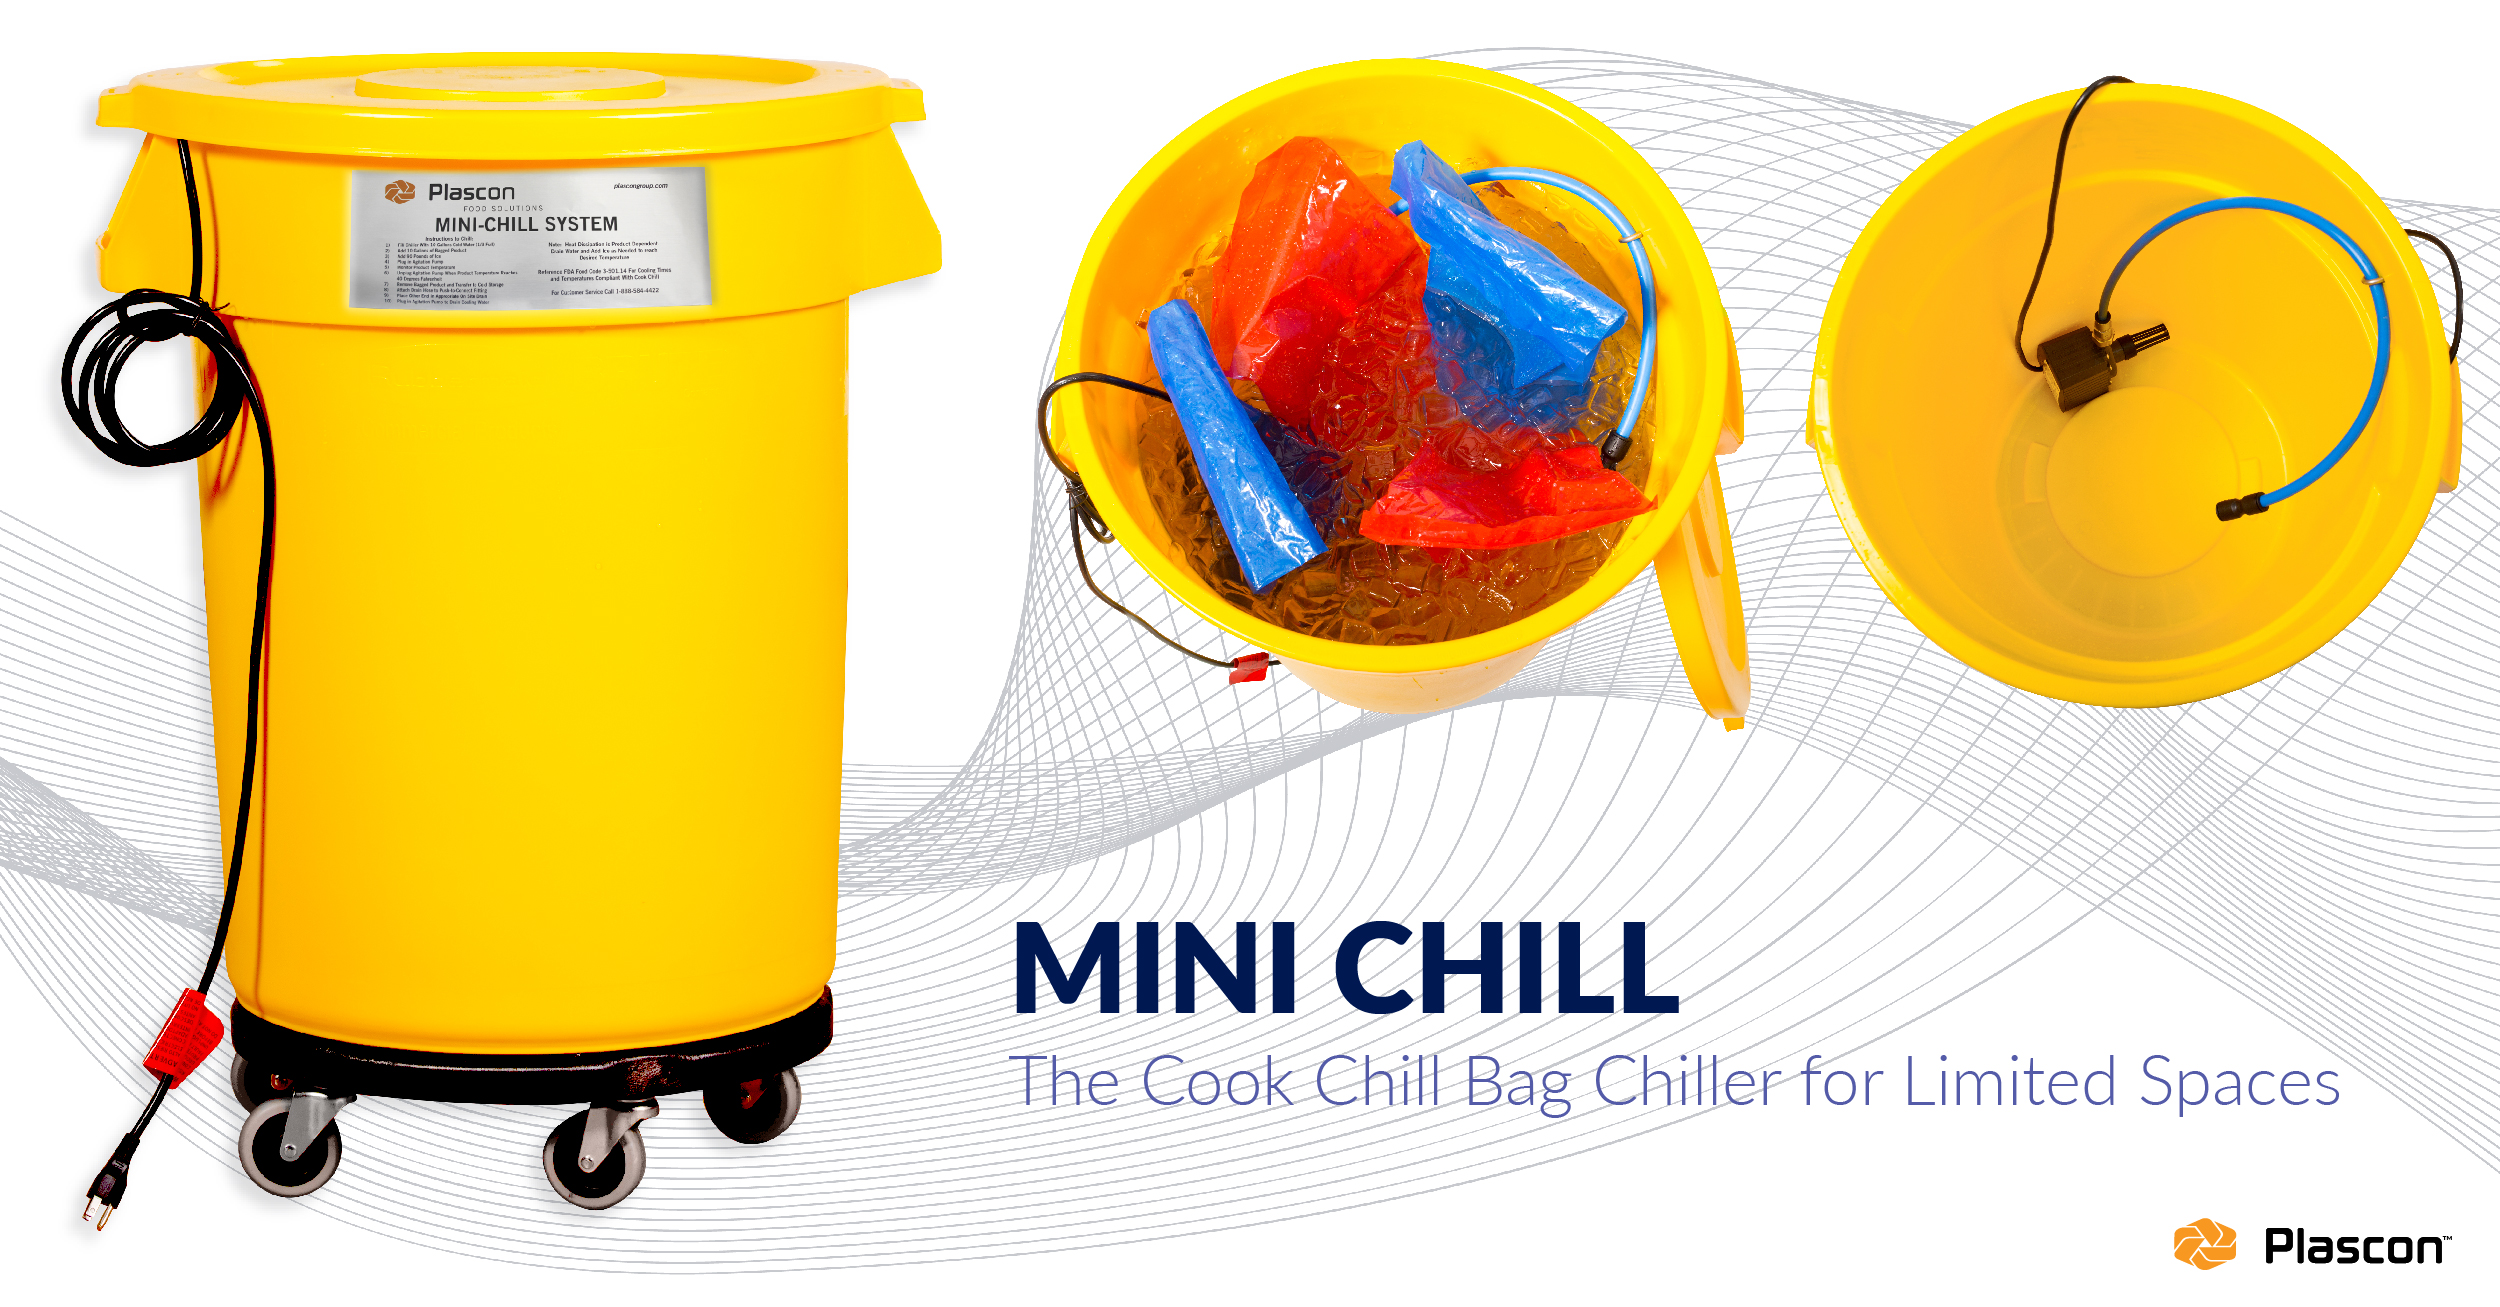 The Mini Chill makes chilling your Cook Chill bags simple and quick.